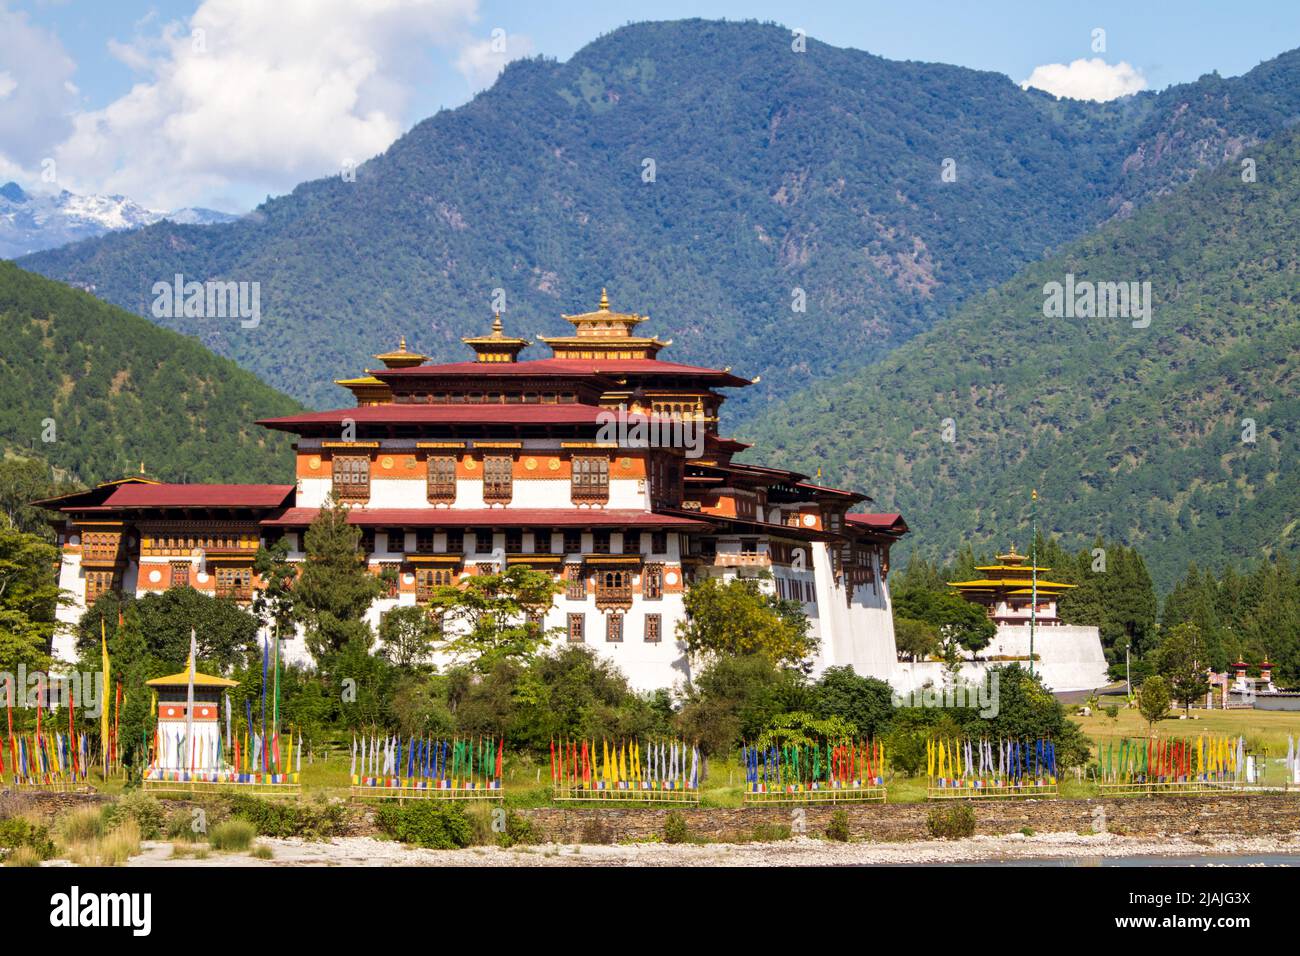 The Punakha Dzong is seen across the Mo Chhu River in central Bhutan while Buddhist prayer flags flutter nearby Stock Photo